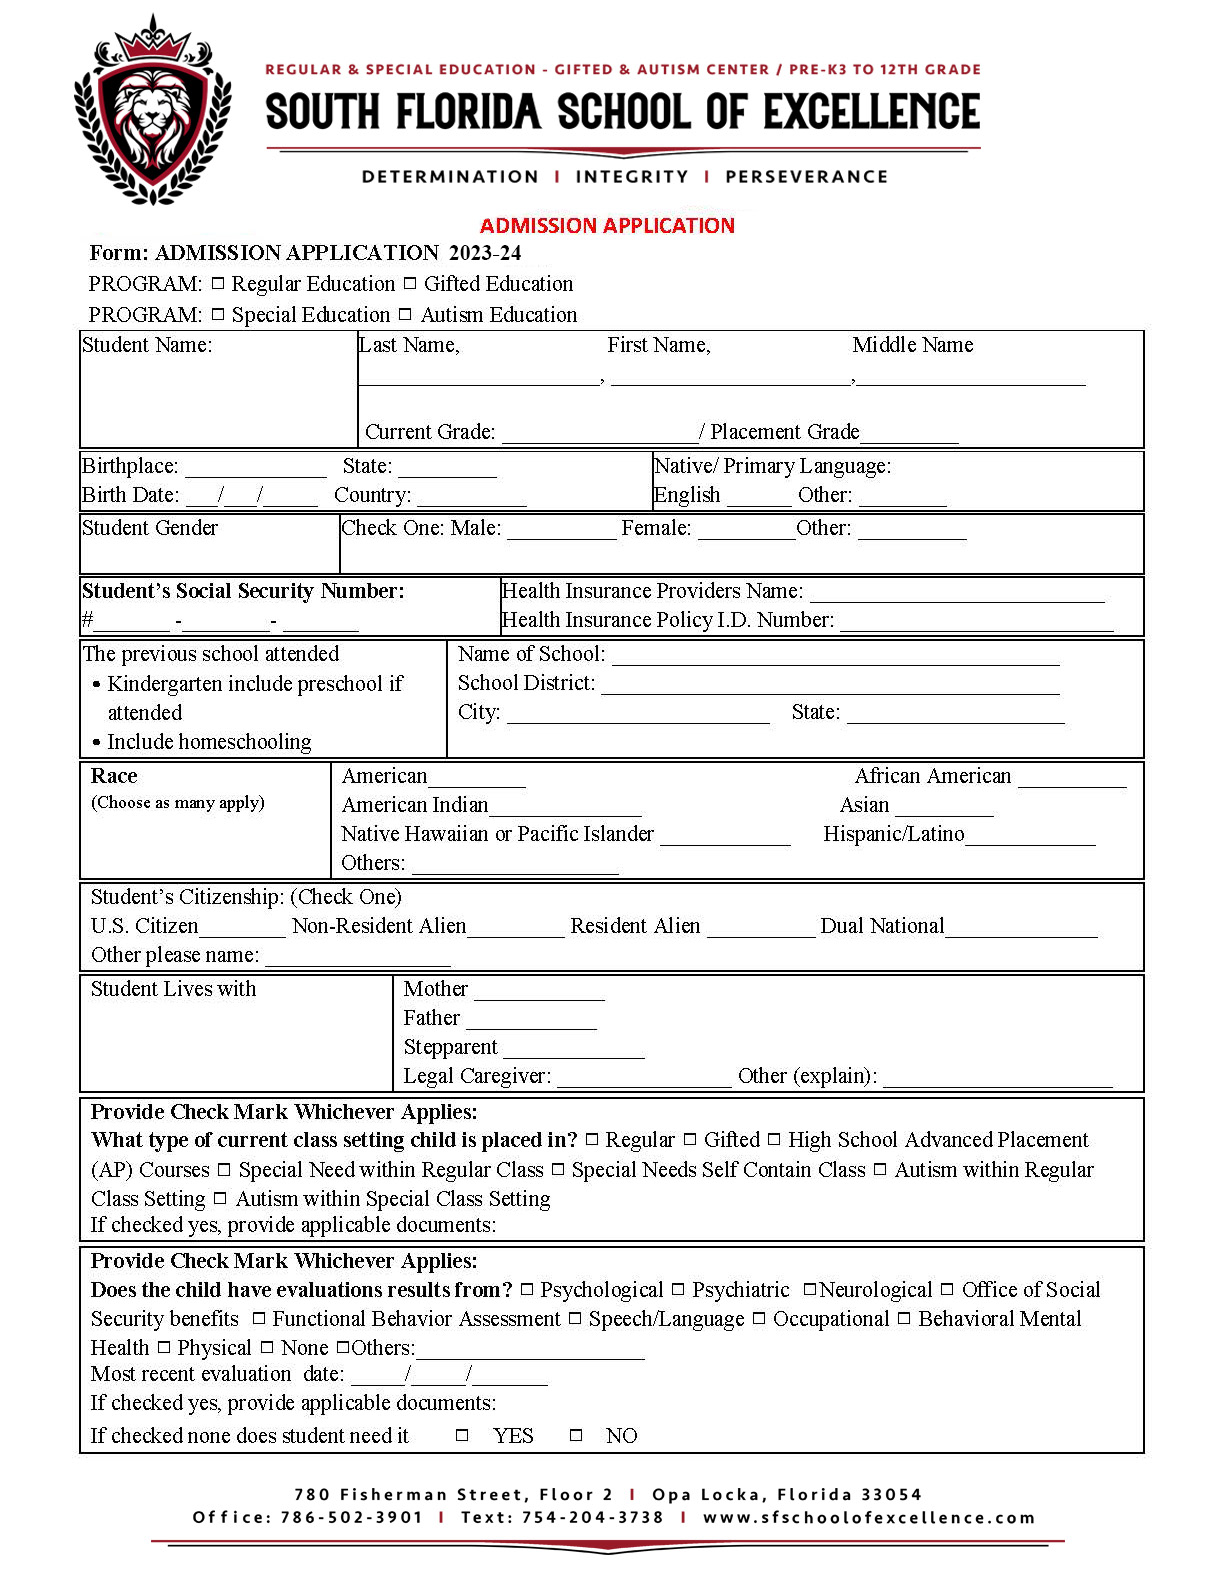 ADMISSION APPLICATION 2023 – 2024_Page_1